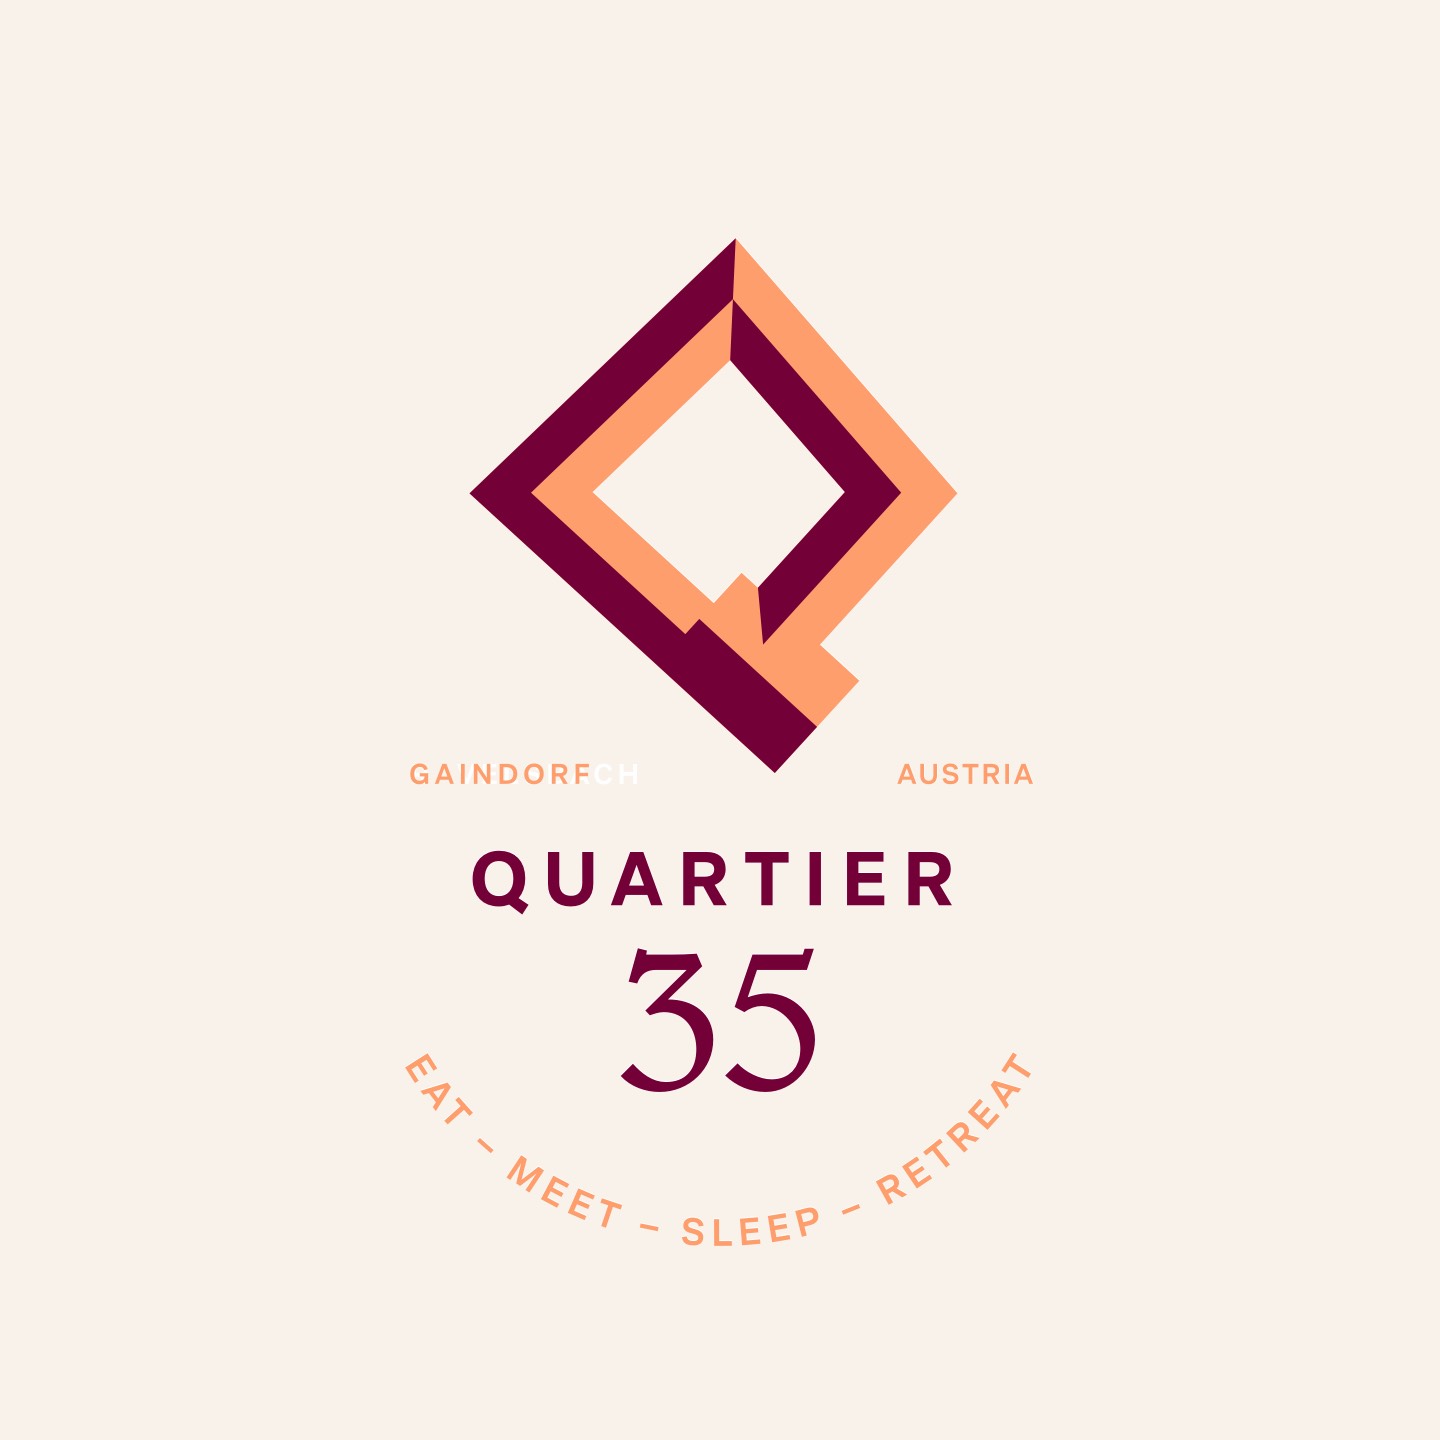 The logo design, based on the building's floor plan and the letter Q